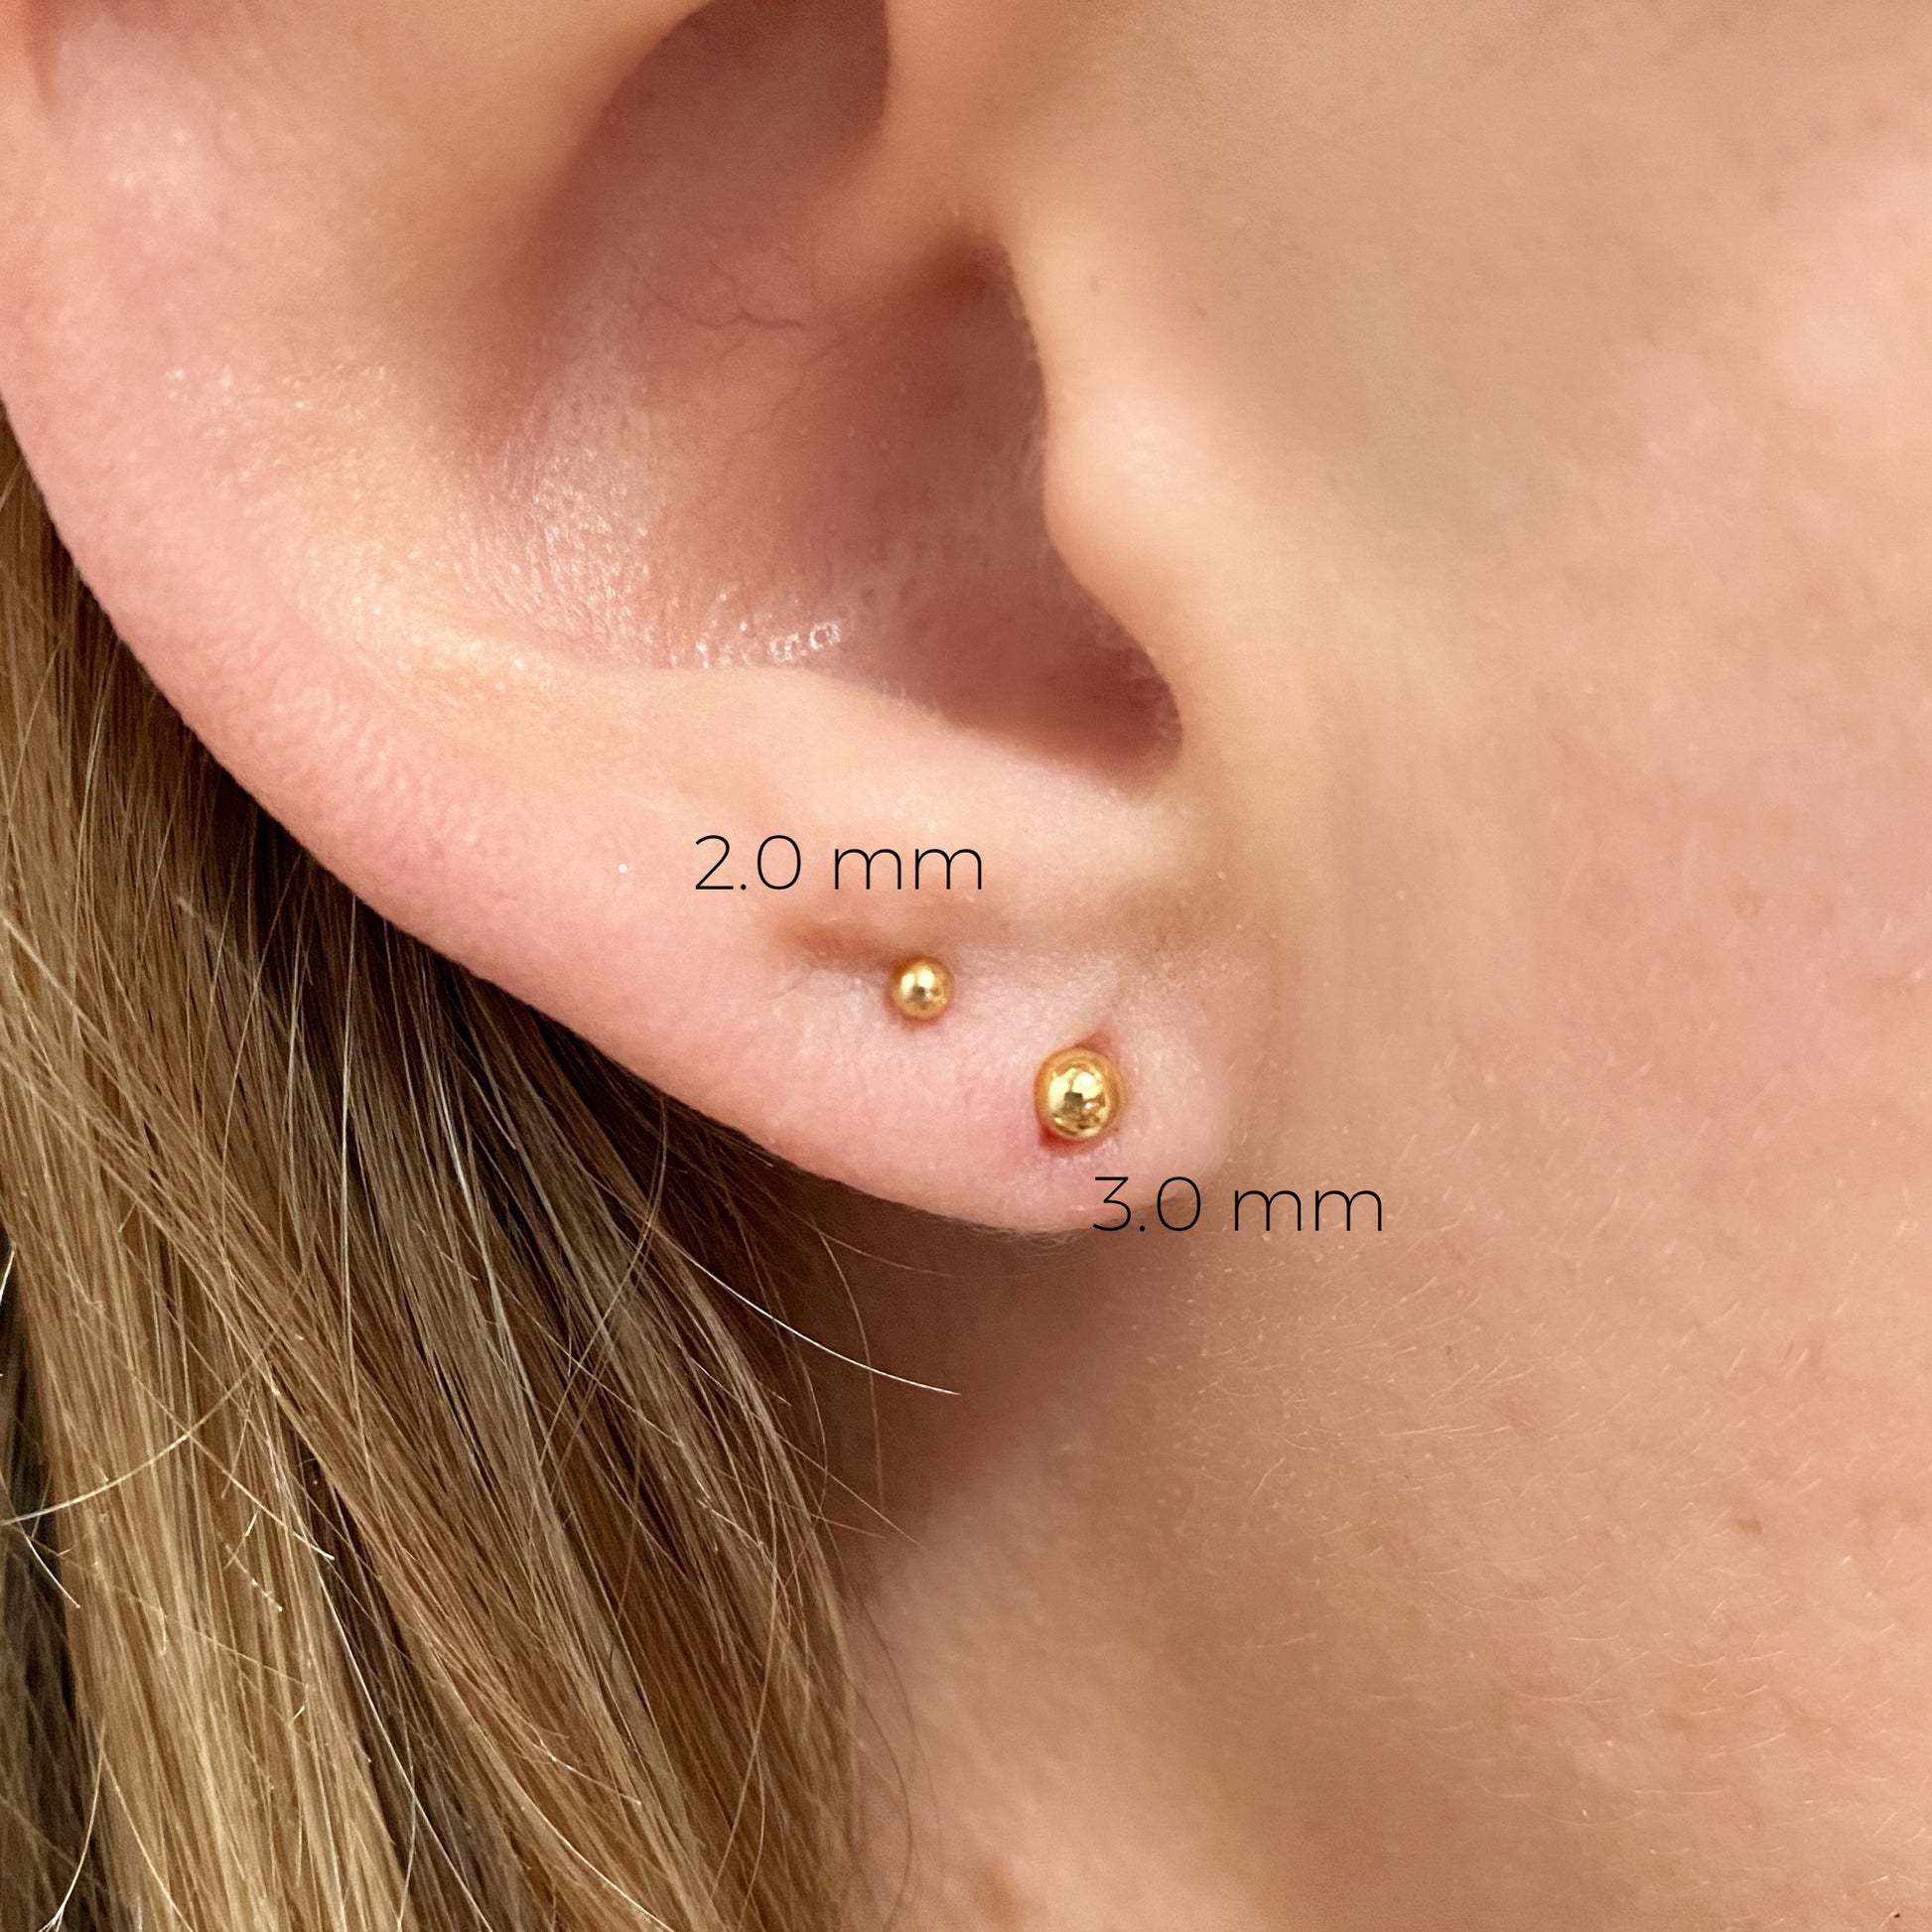 Gold-Filled 14K/20 Post Earring with 3-Link Paperclip Chain (1 Pair) 